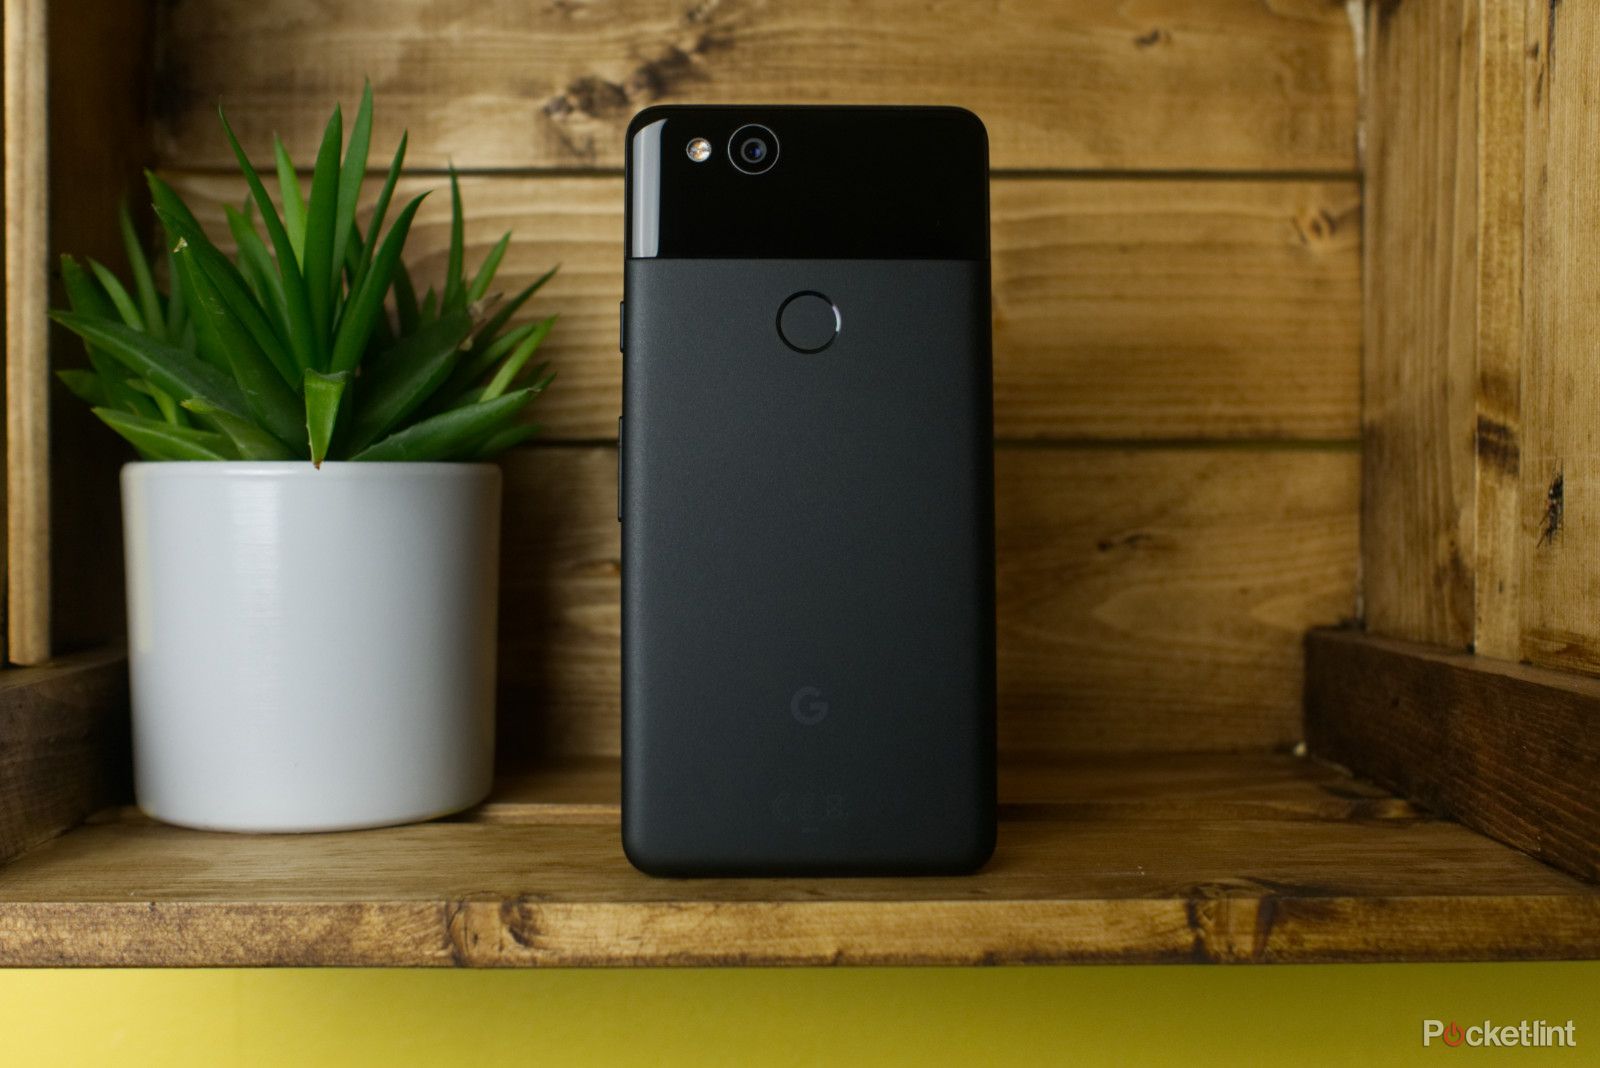 Google hid an image processor inside Pixel 2 and didnt turn it on image 1